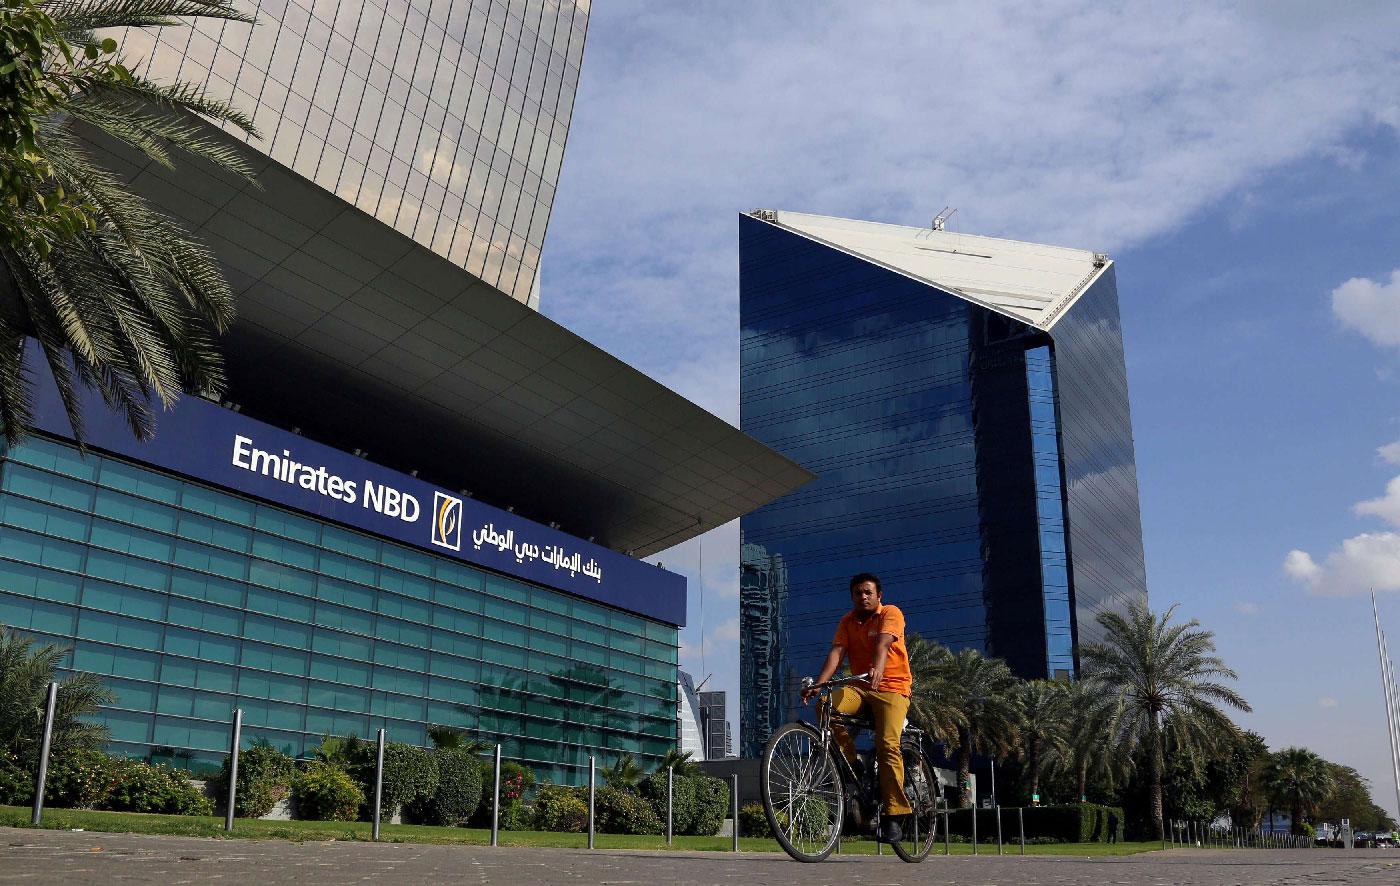 A man rides a bicycle past Emirates NBD head office in Dubai, UAE January 30, 2018.